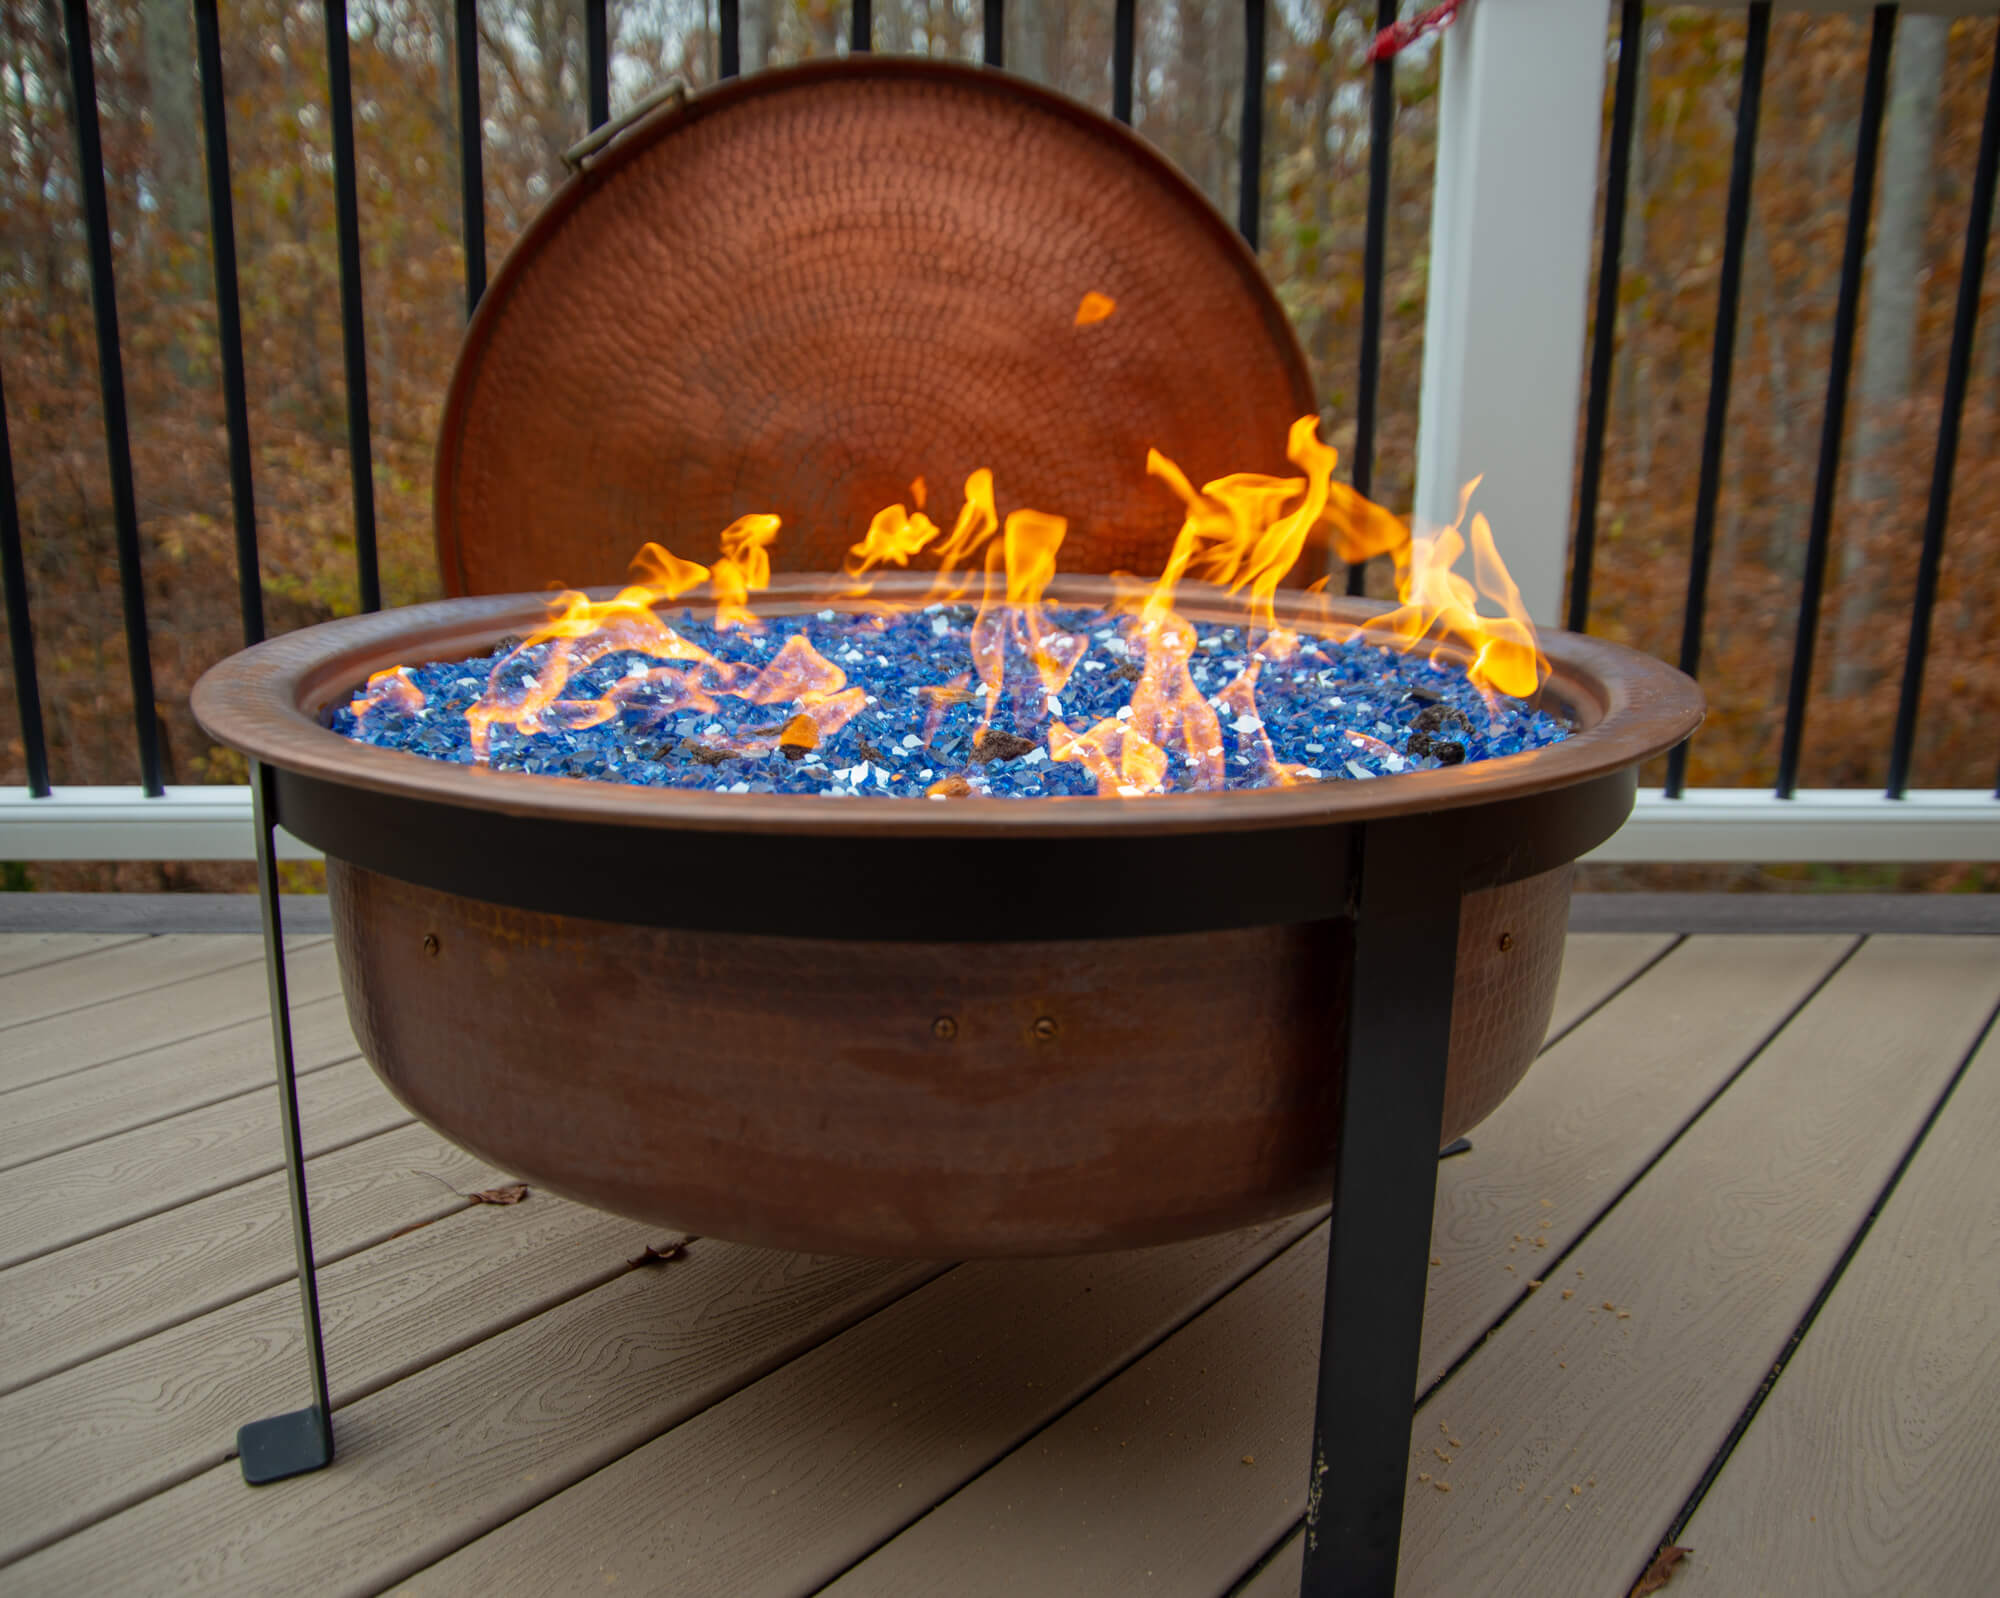 6 Ways to put a Fire Pit on a Wooden Deck